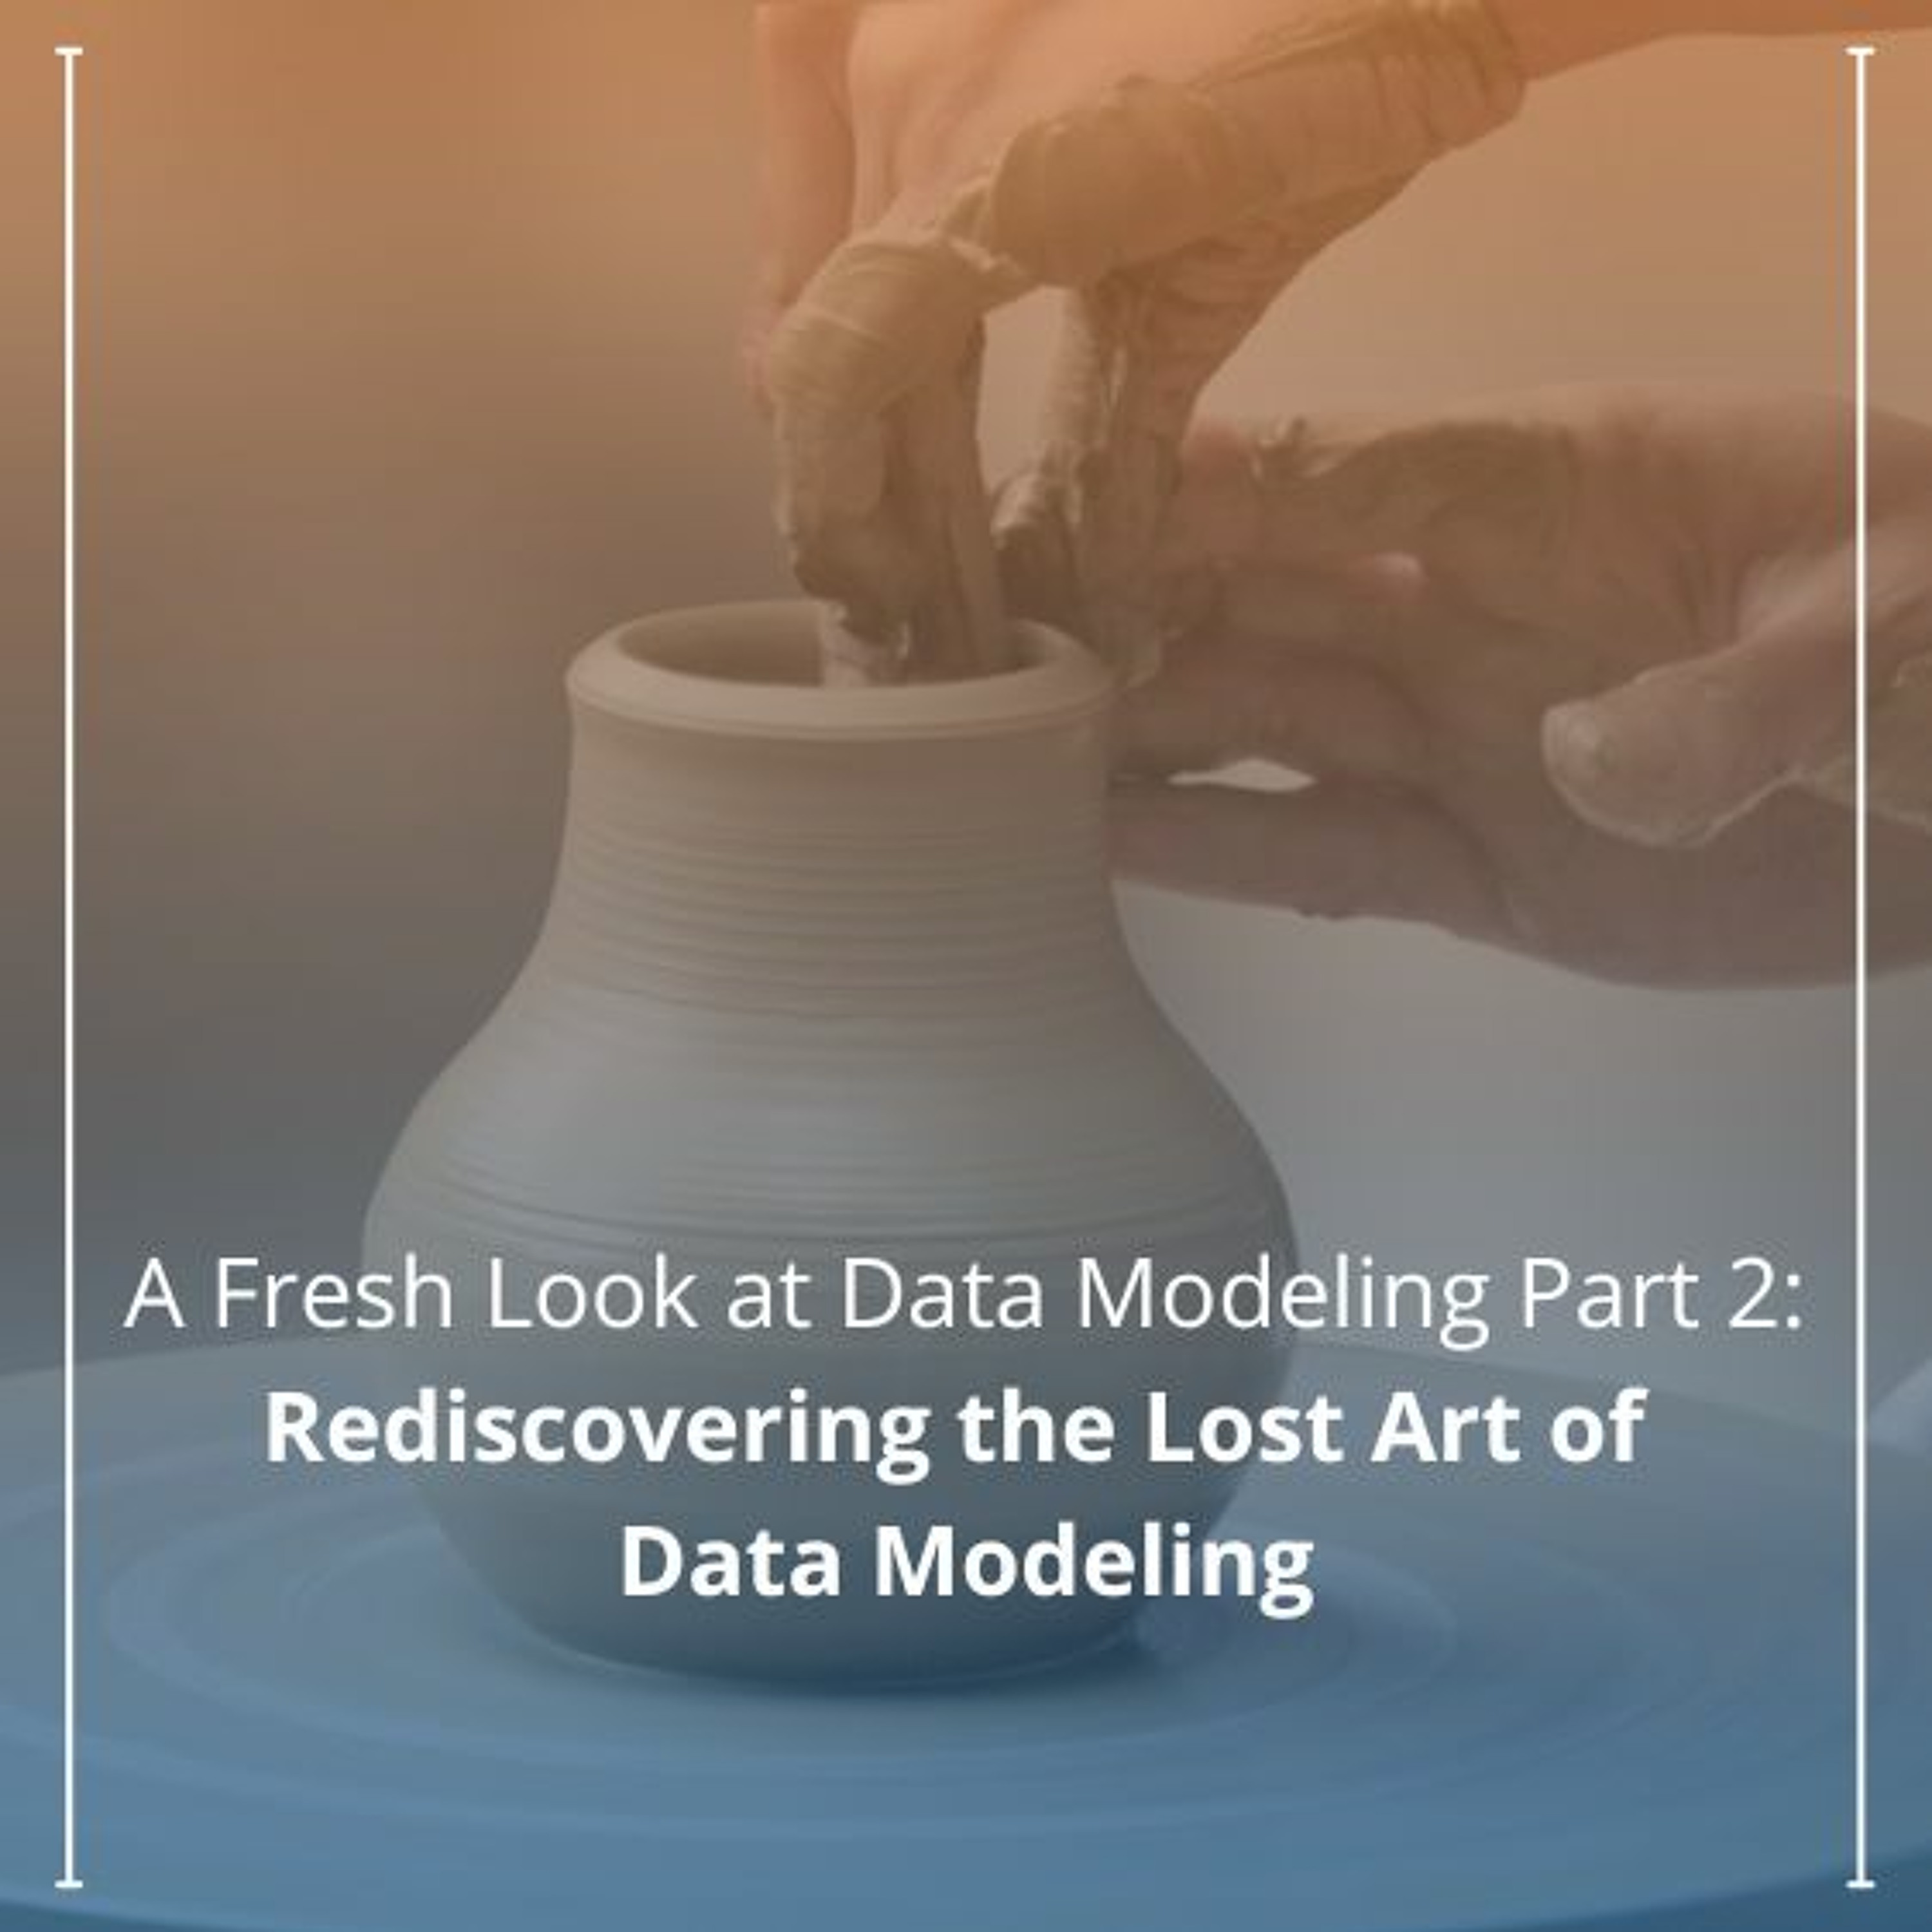 A Fresh Look at Data Modeling Part 2: Rediscovering the Lost Art of Data Modeling - Audio Blog